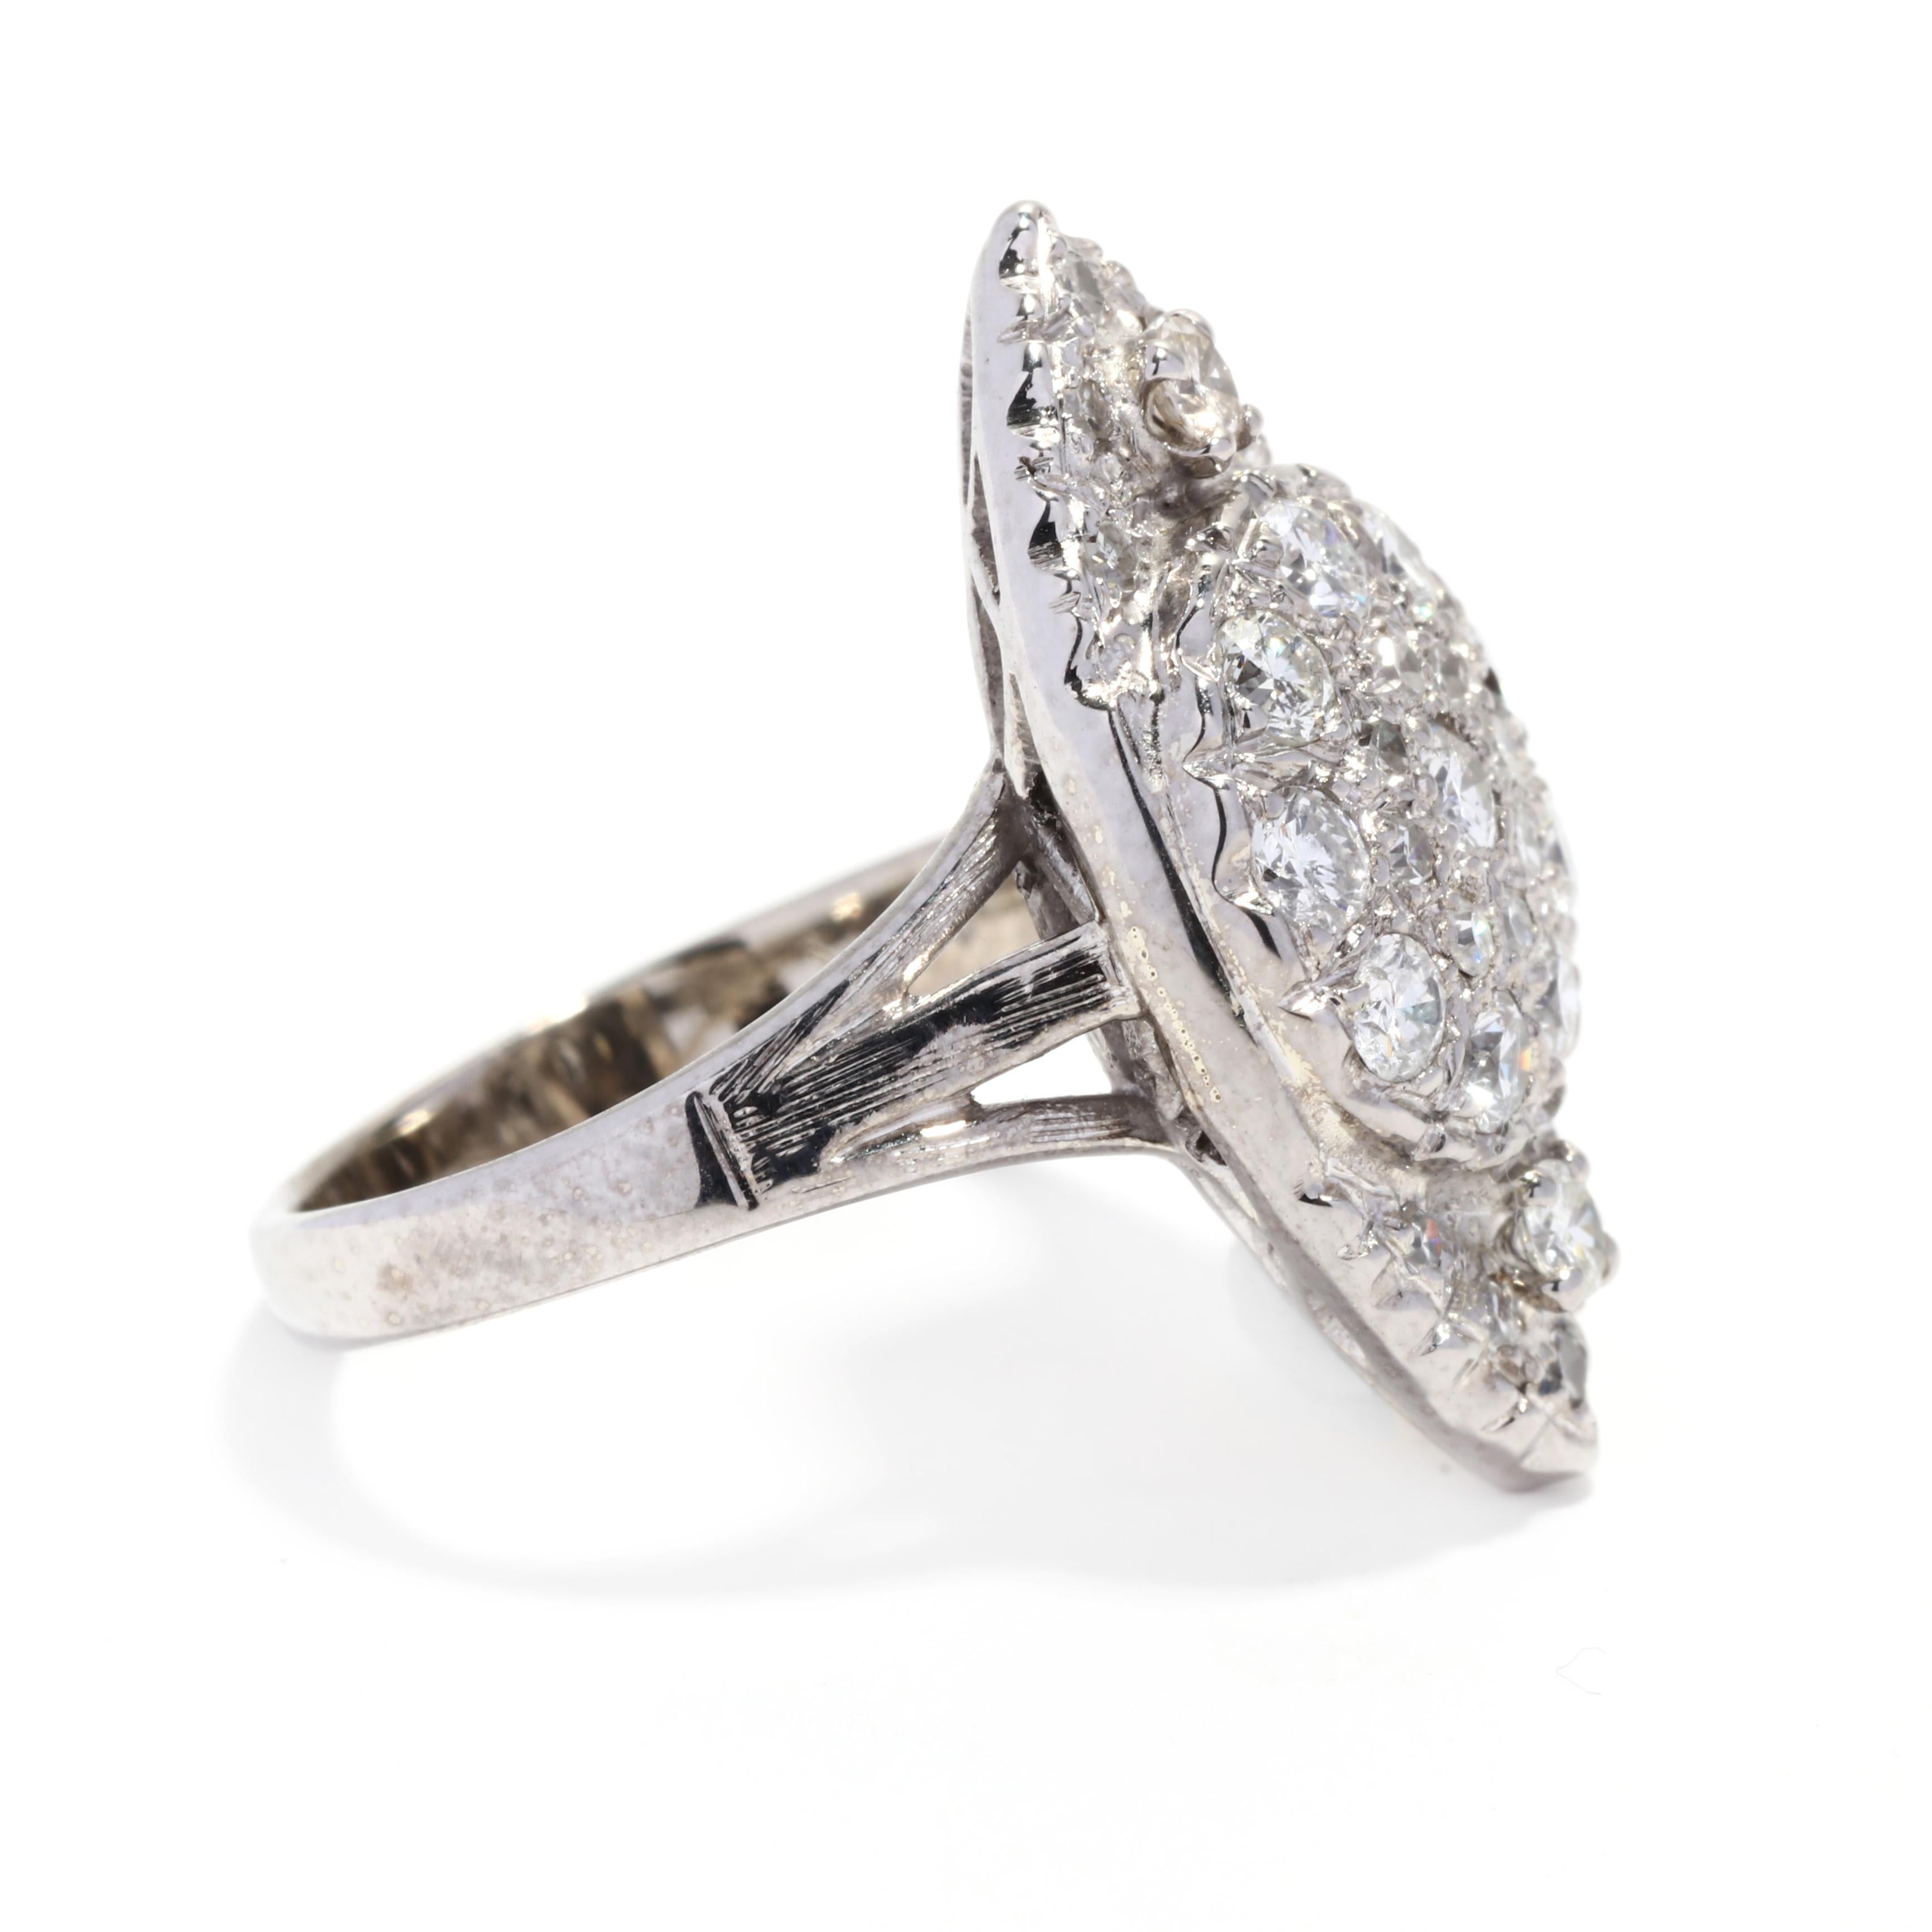 A vintage 14 karat white gold diamond navette ring. This cluster ring features a marquise shape with prong set, round brilliant and single cut diamonds weighing approximately 1 total carat and with a split band.

Stones:
- diamonds, 30 stones
-